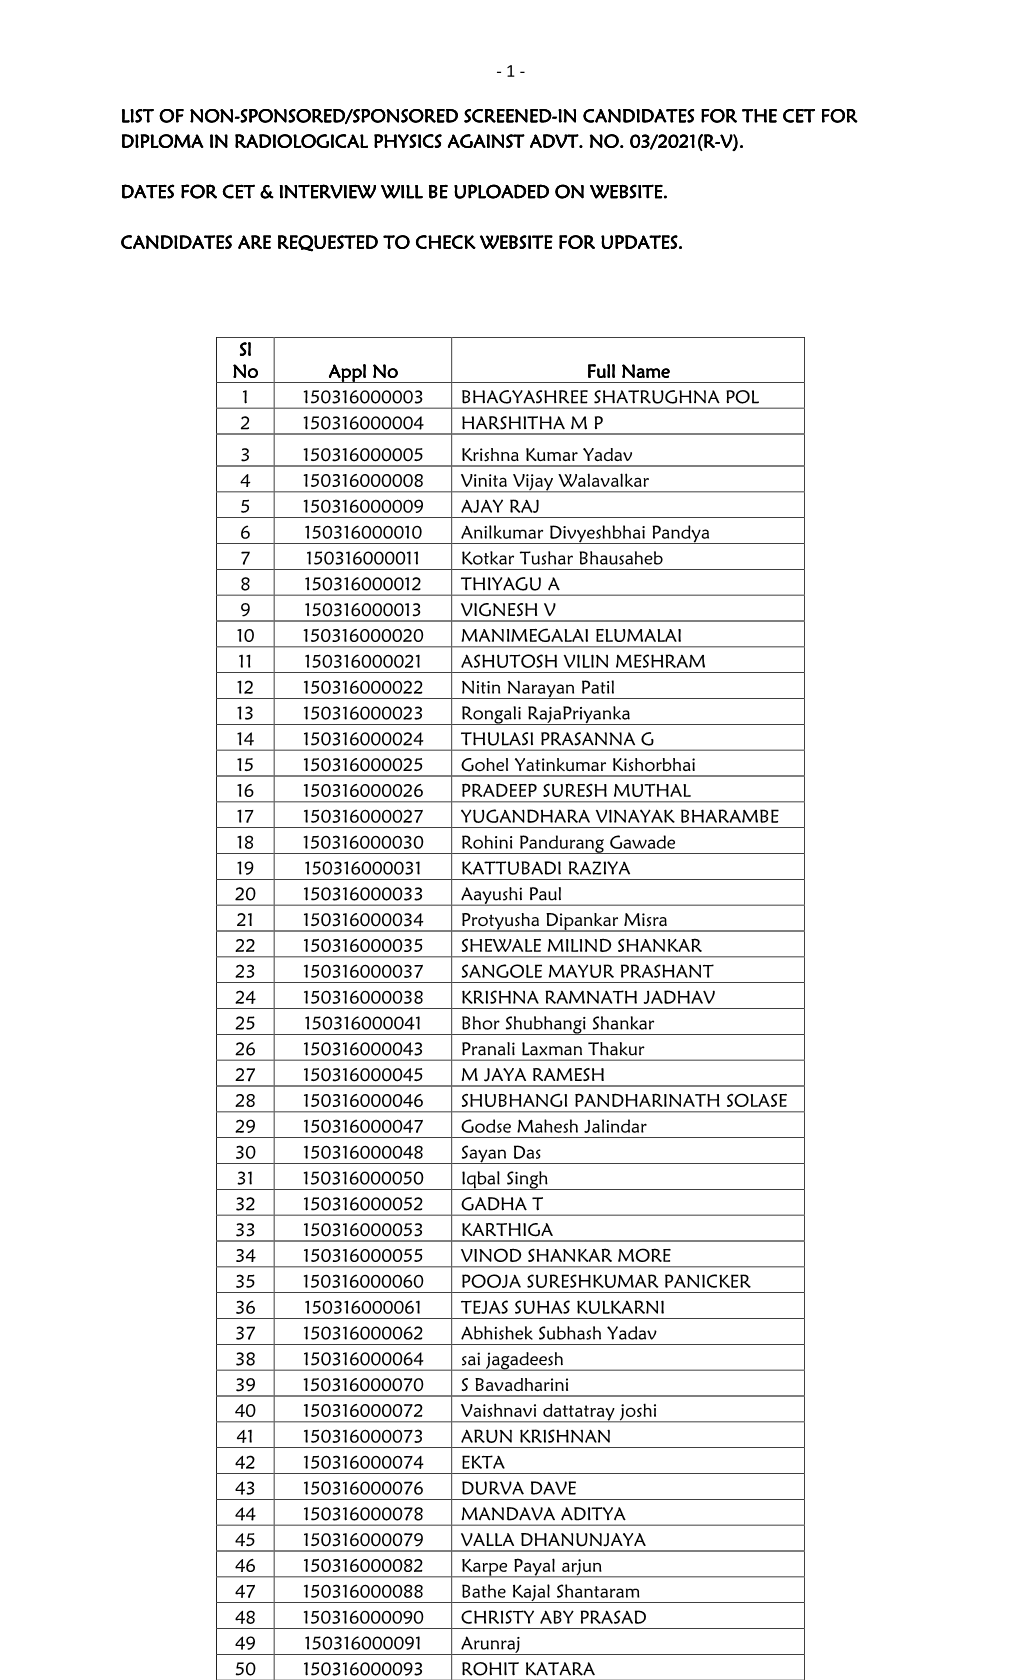 List of Non-Sponsored/Sponsored Screened-In Candidates for the CET